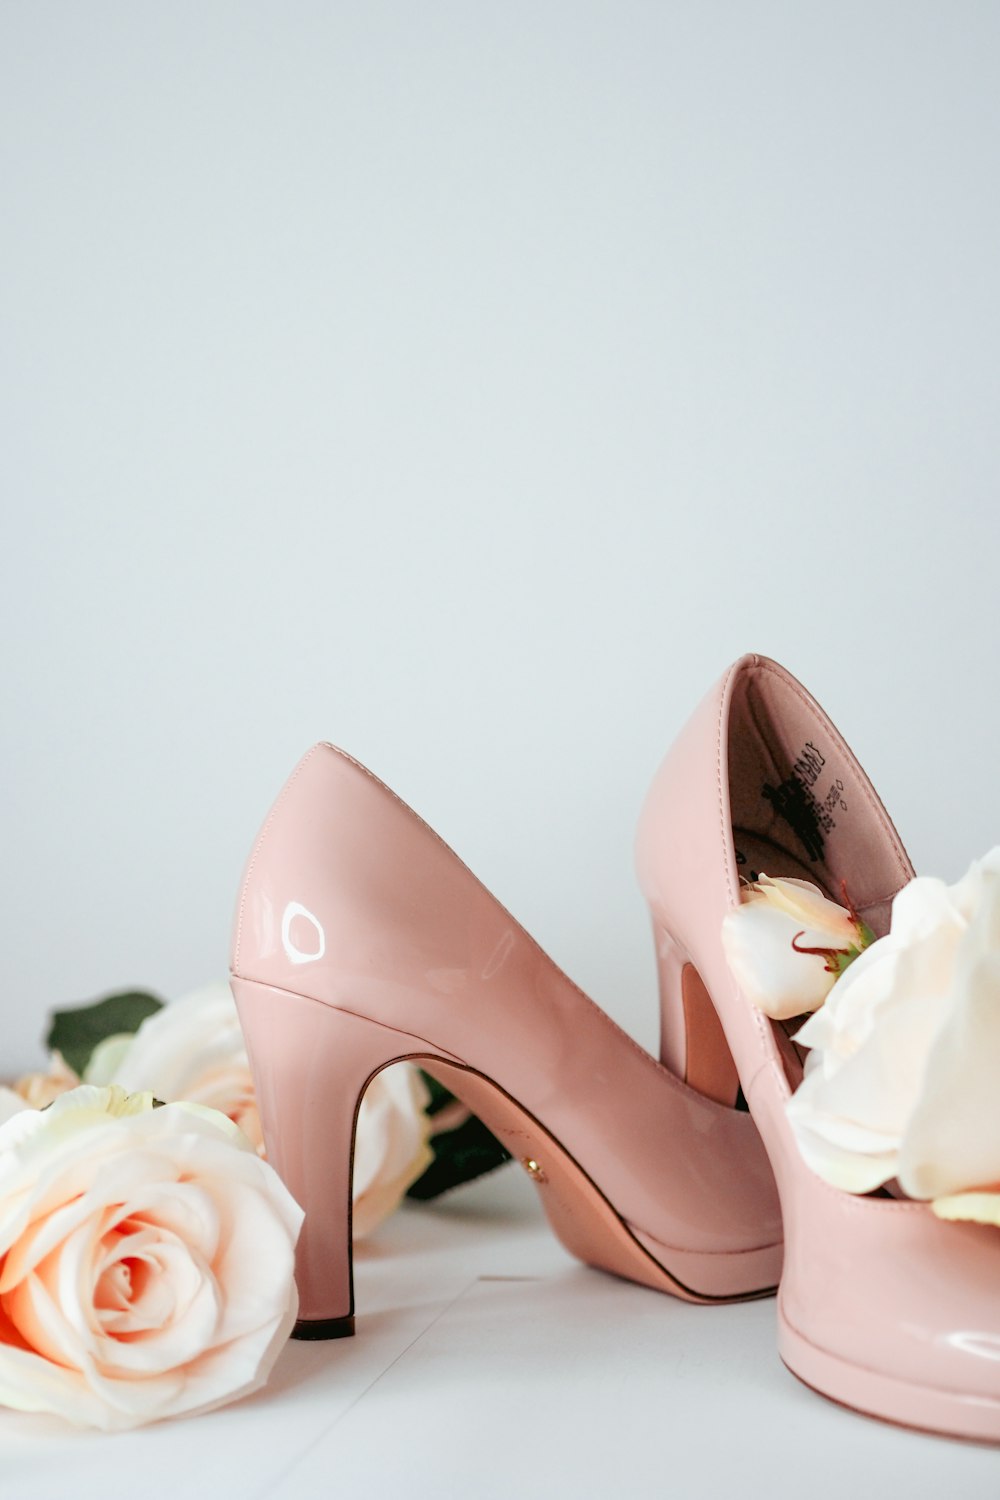 a pair of pink high heeled shoes next to a bouquet of roses